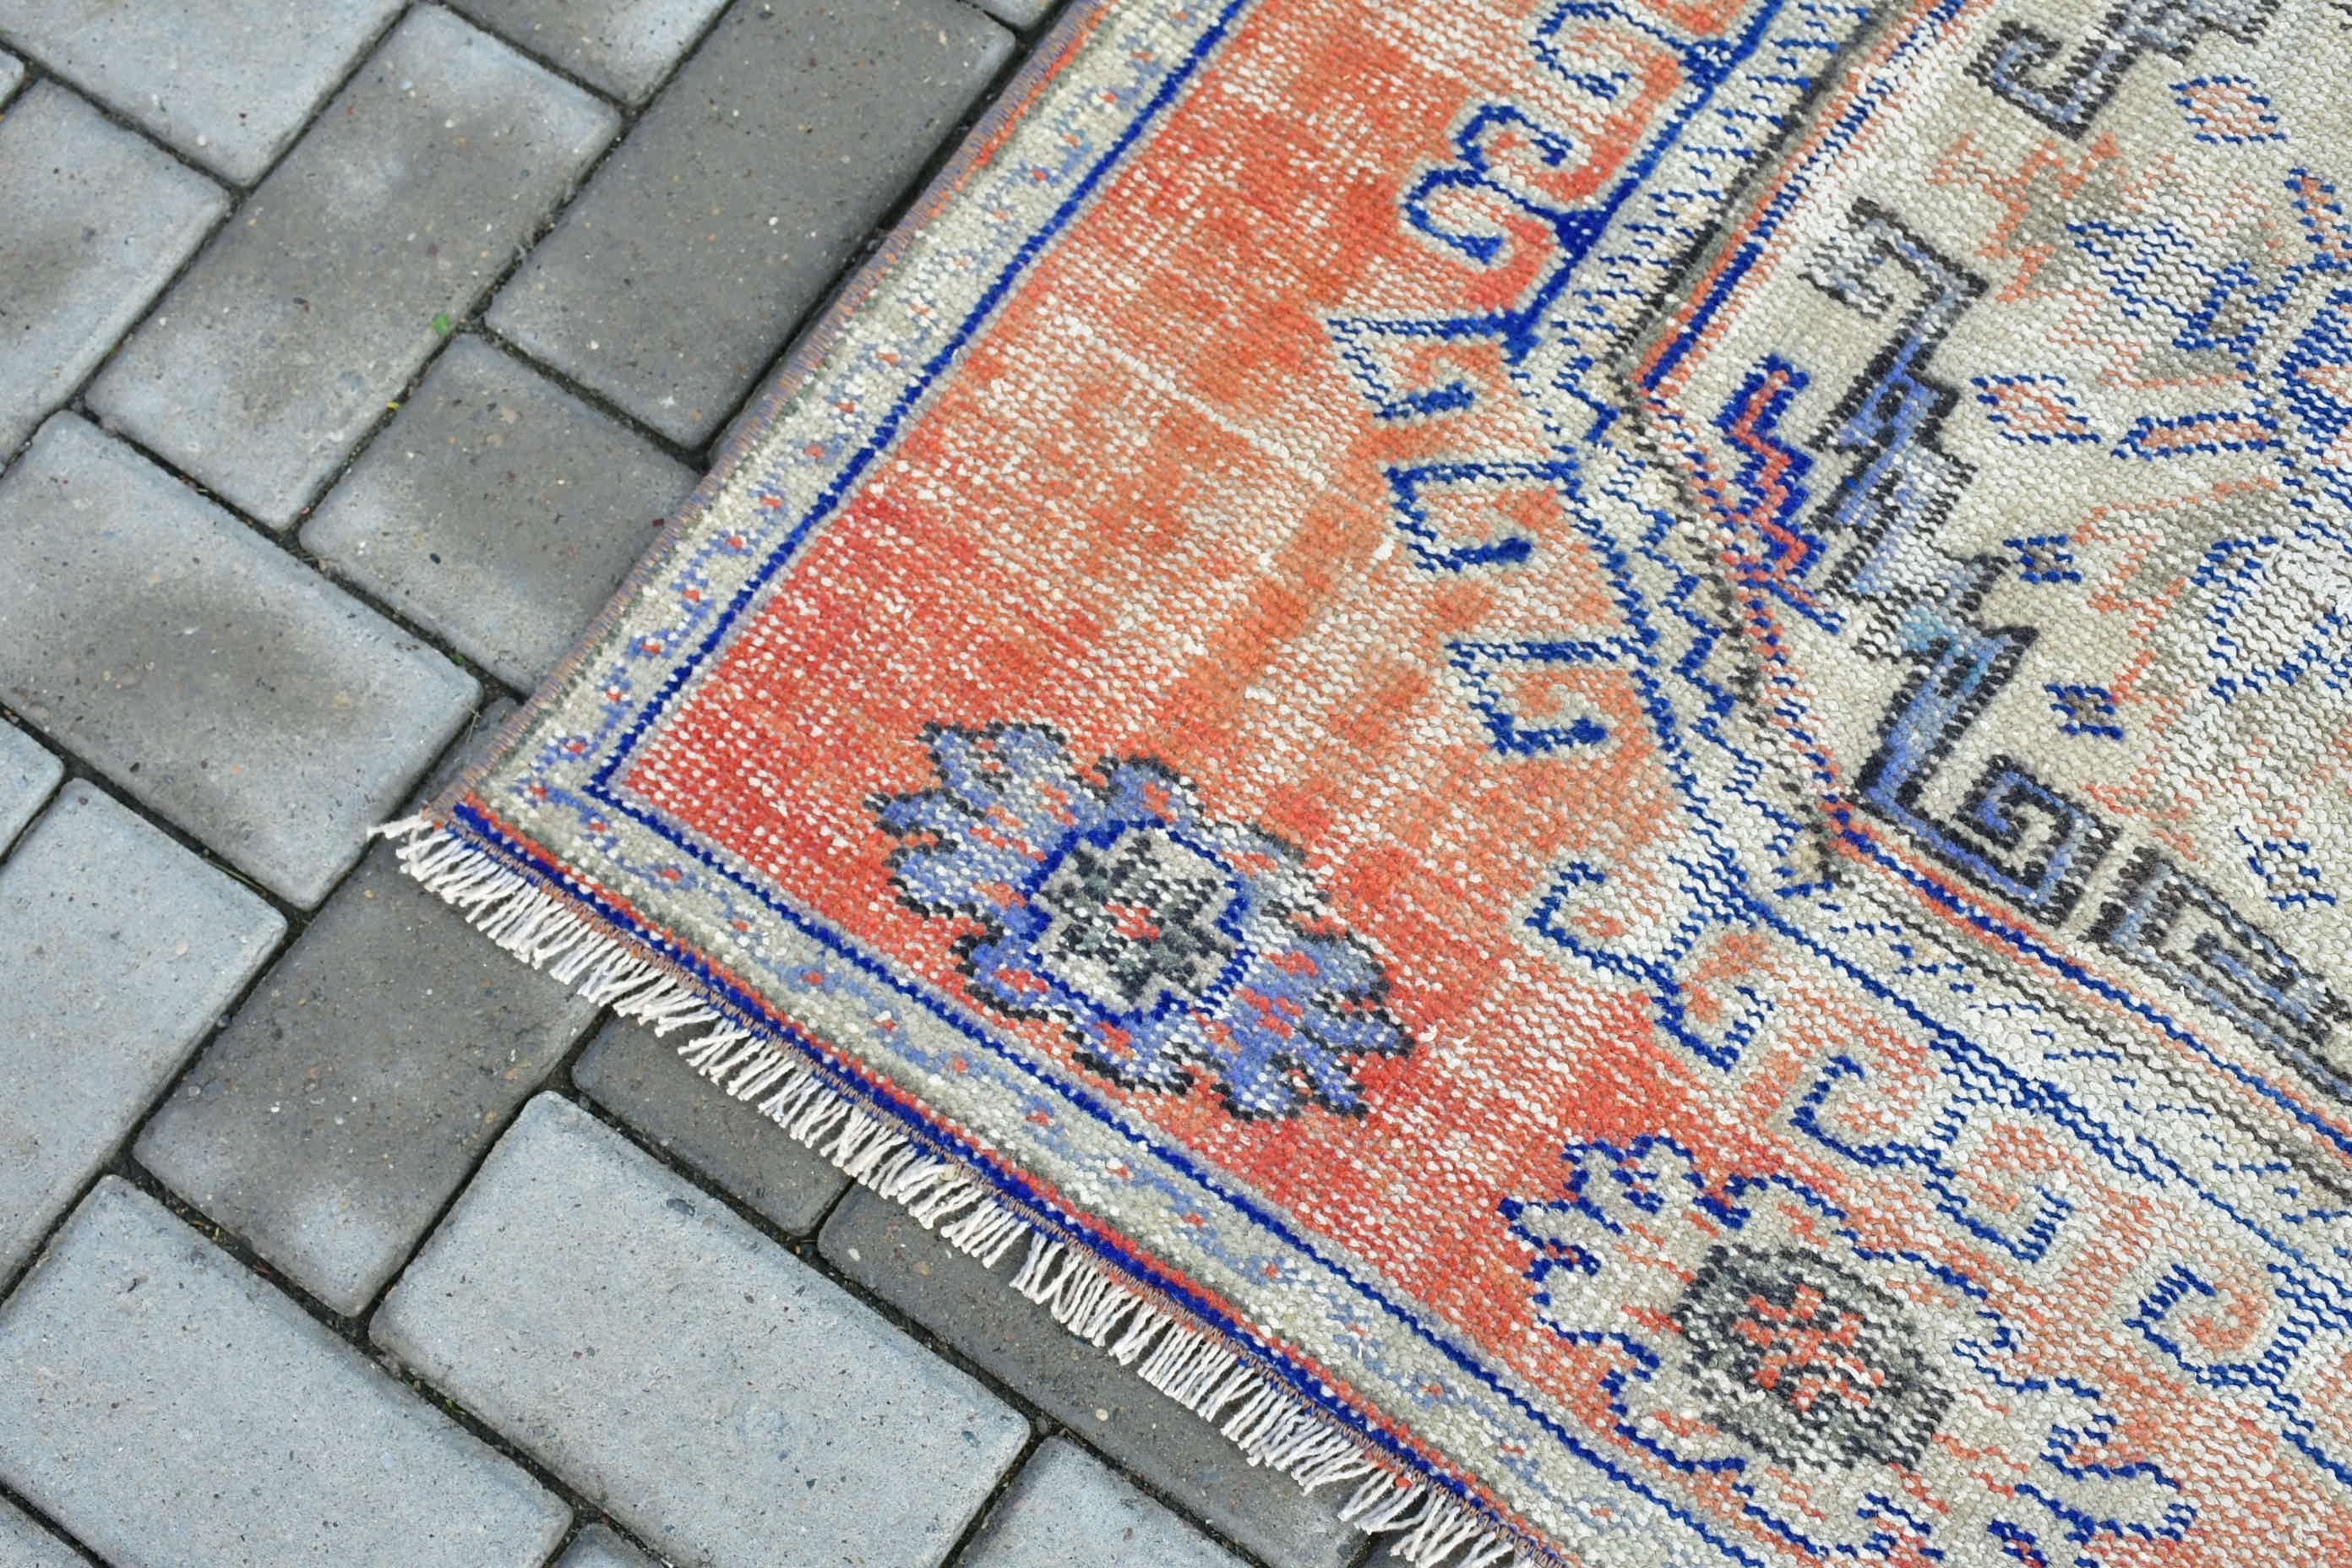 Turkish Rug, 3.2x10.1 ft Runner Rugs, Anatolian Rugs, Red Home Decor Rug, Vintage Rug, Moroccan Rug, Rugs for Kitchen, Stair Rug, Dorm Rug